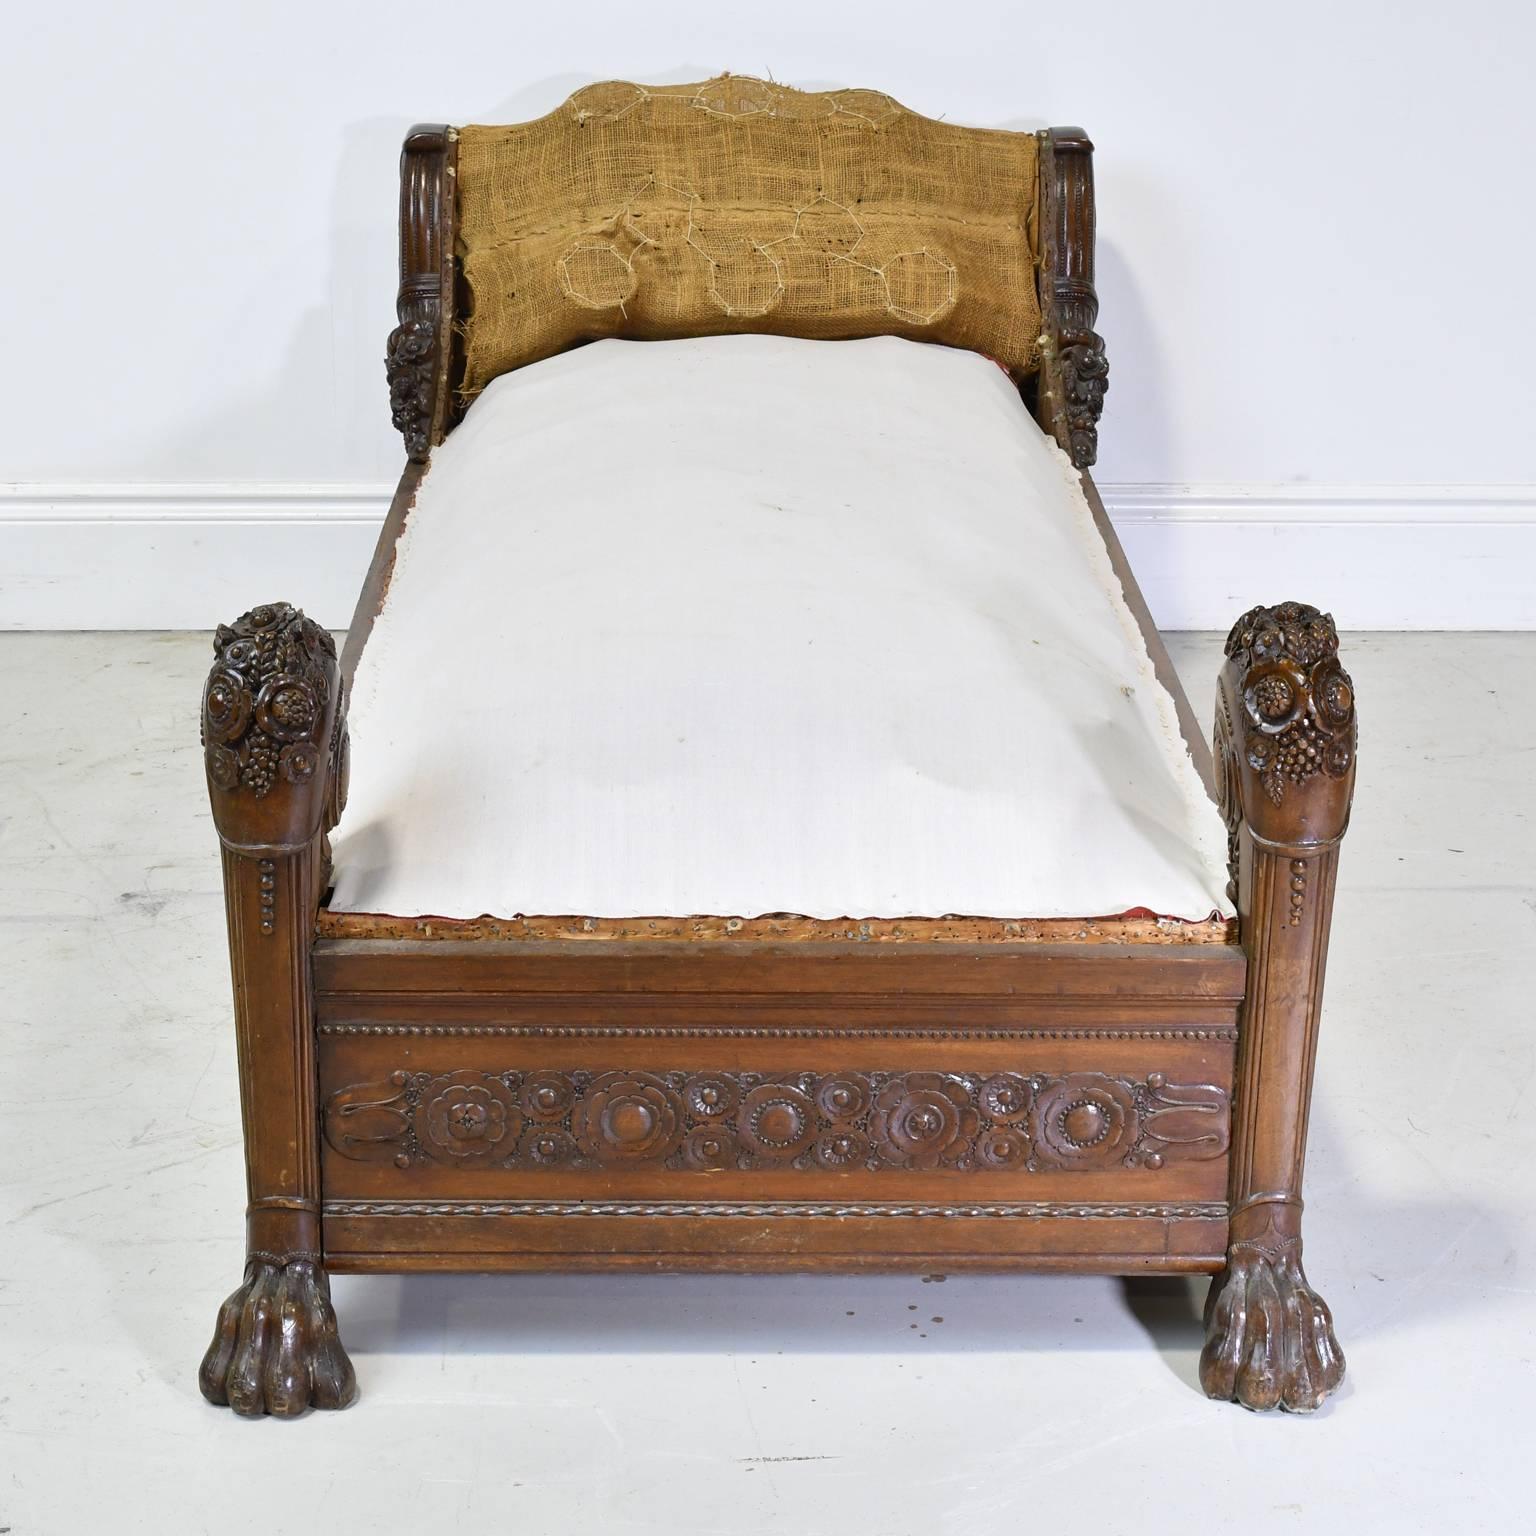 Hand-Carved Late 18th Century French Directoire Daybed in Carved Mahogany